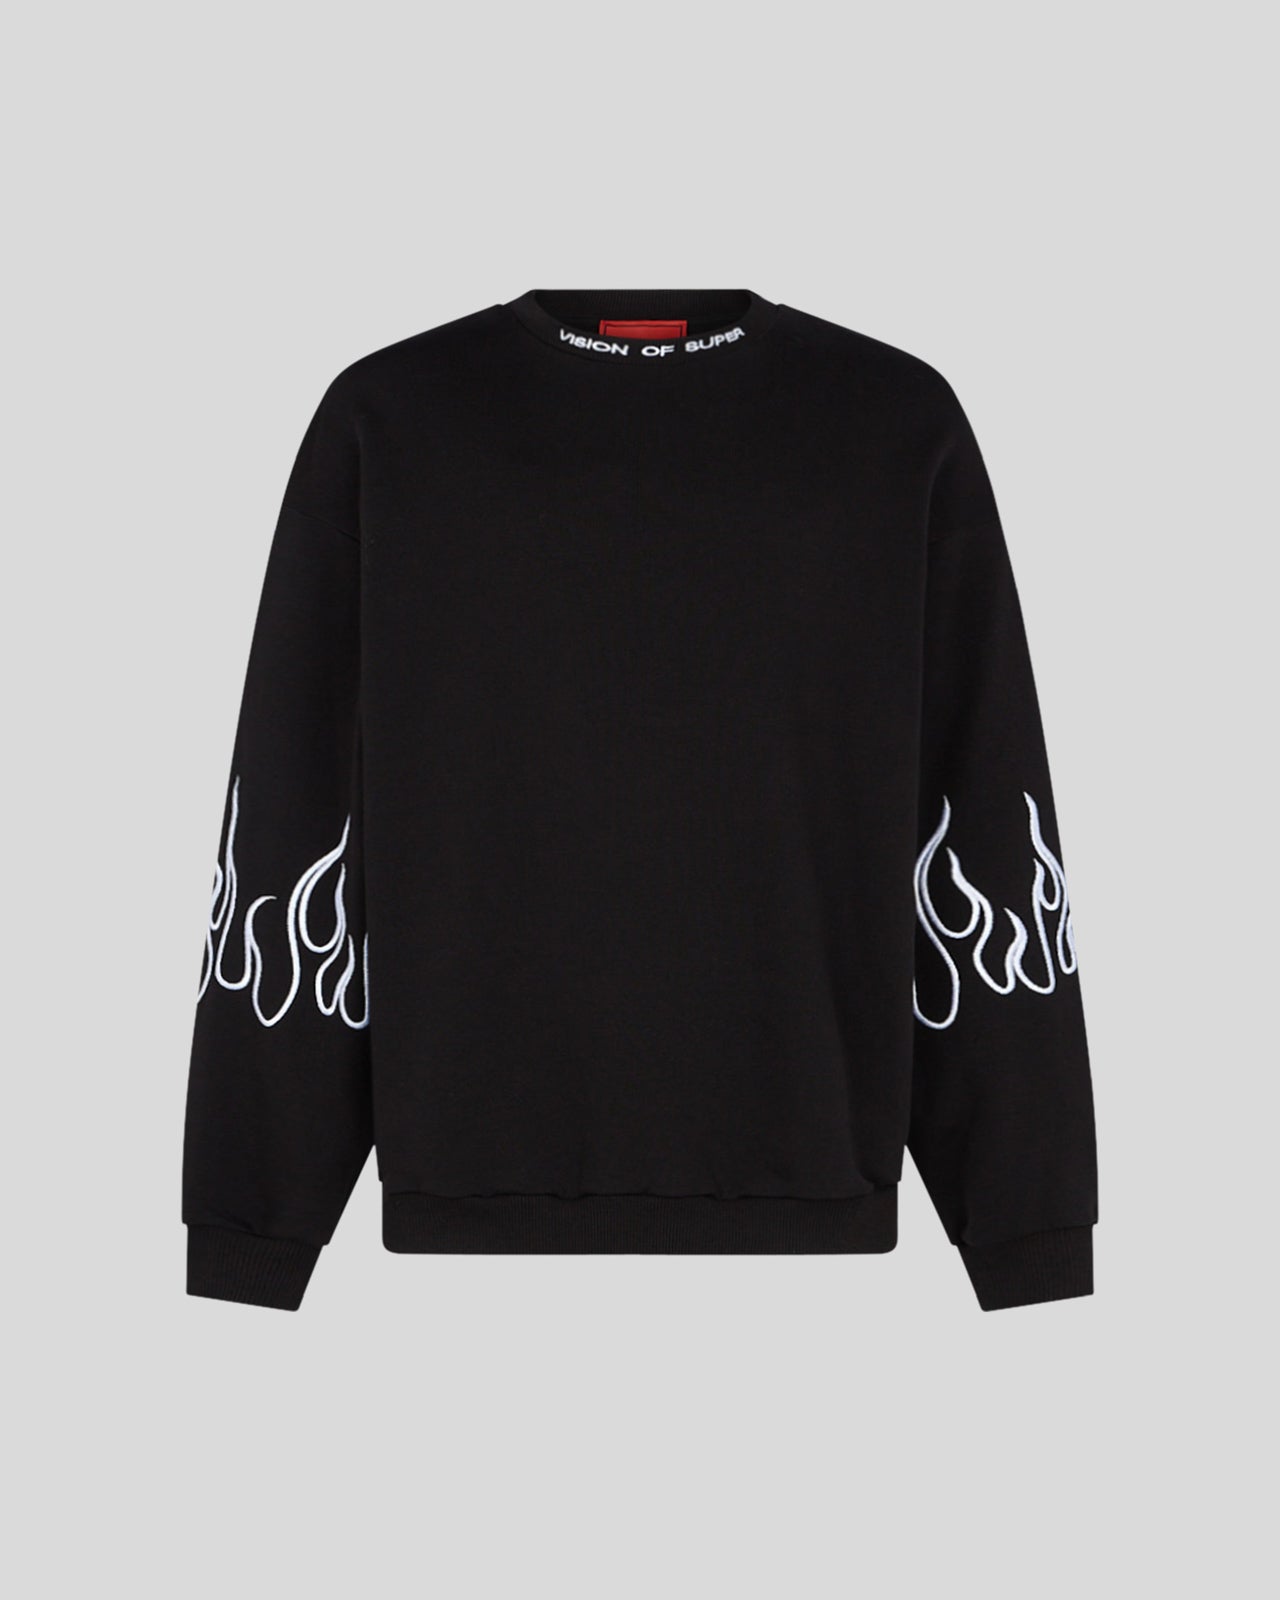 VISION OF SUPER BLACK CREWNECK WITH WHITE EMBROIDERED FLAMES